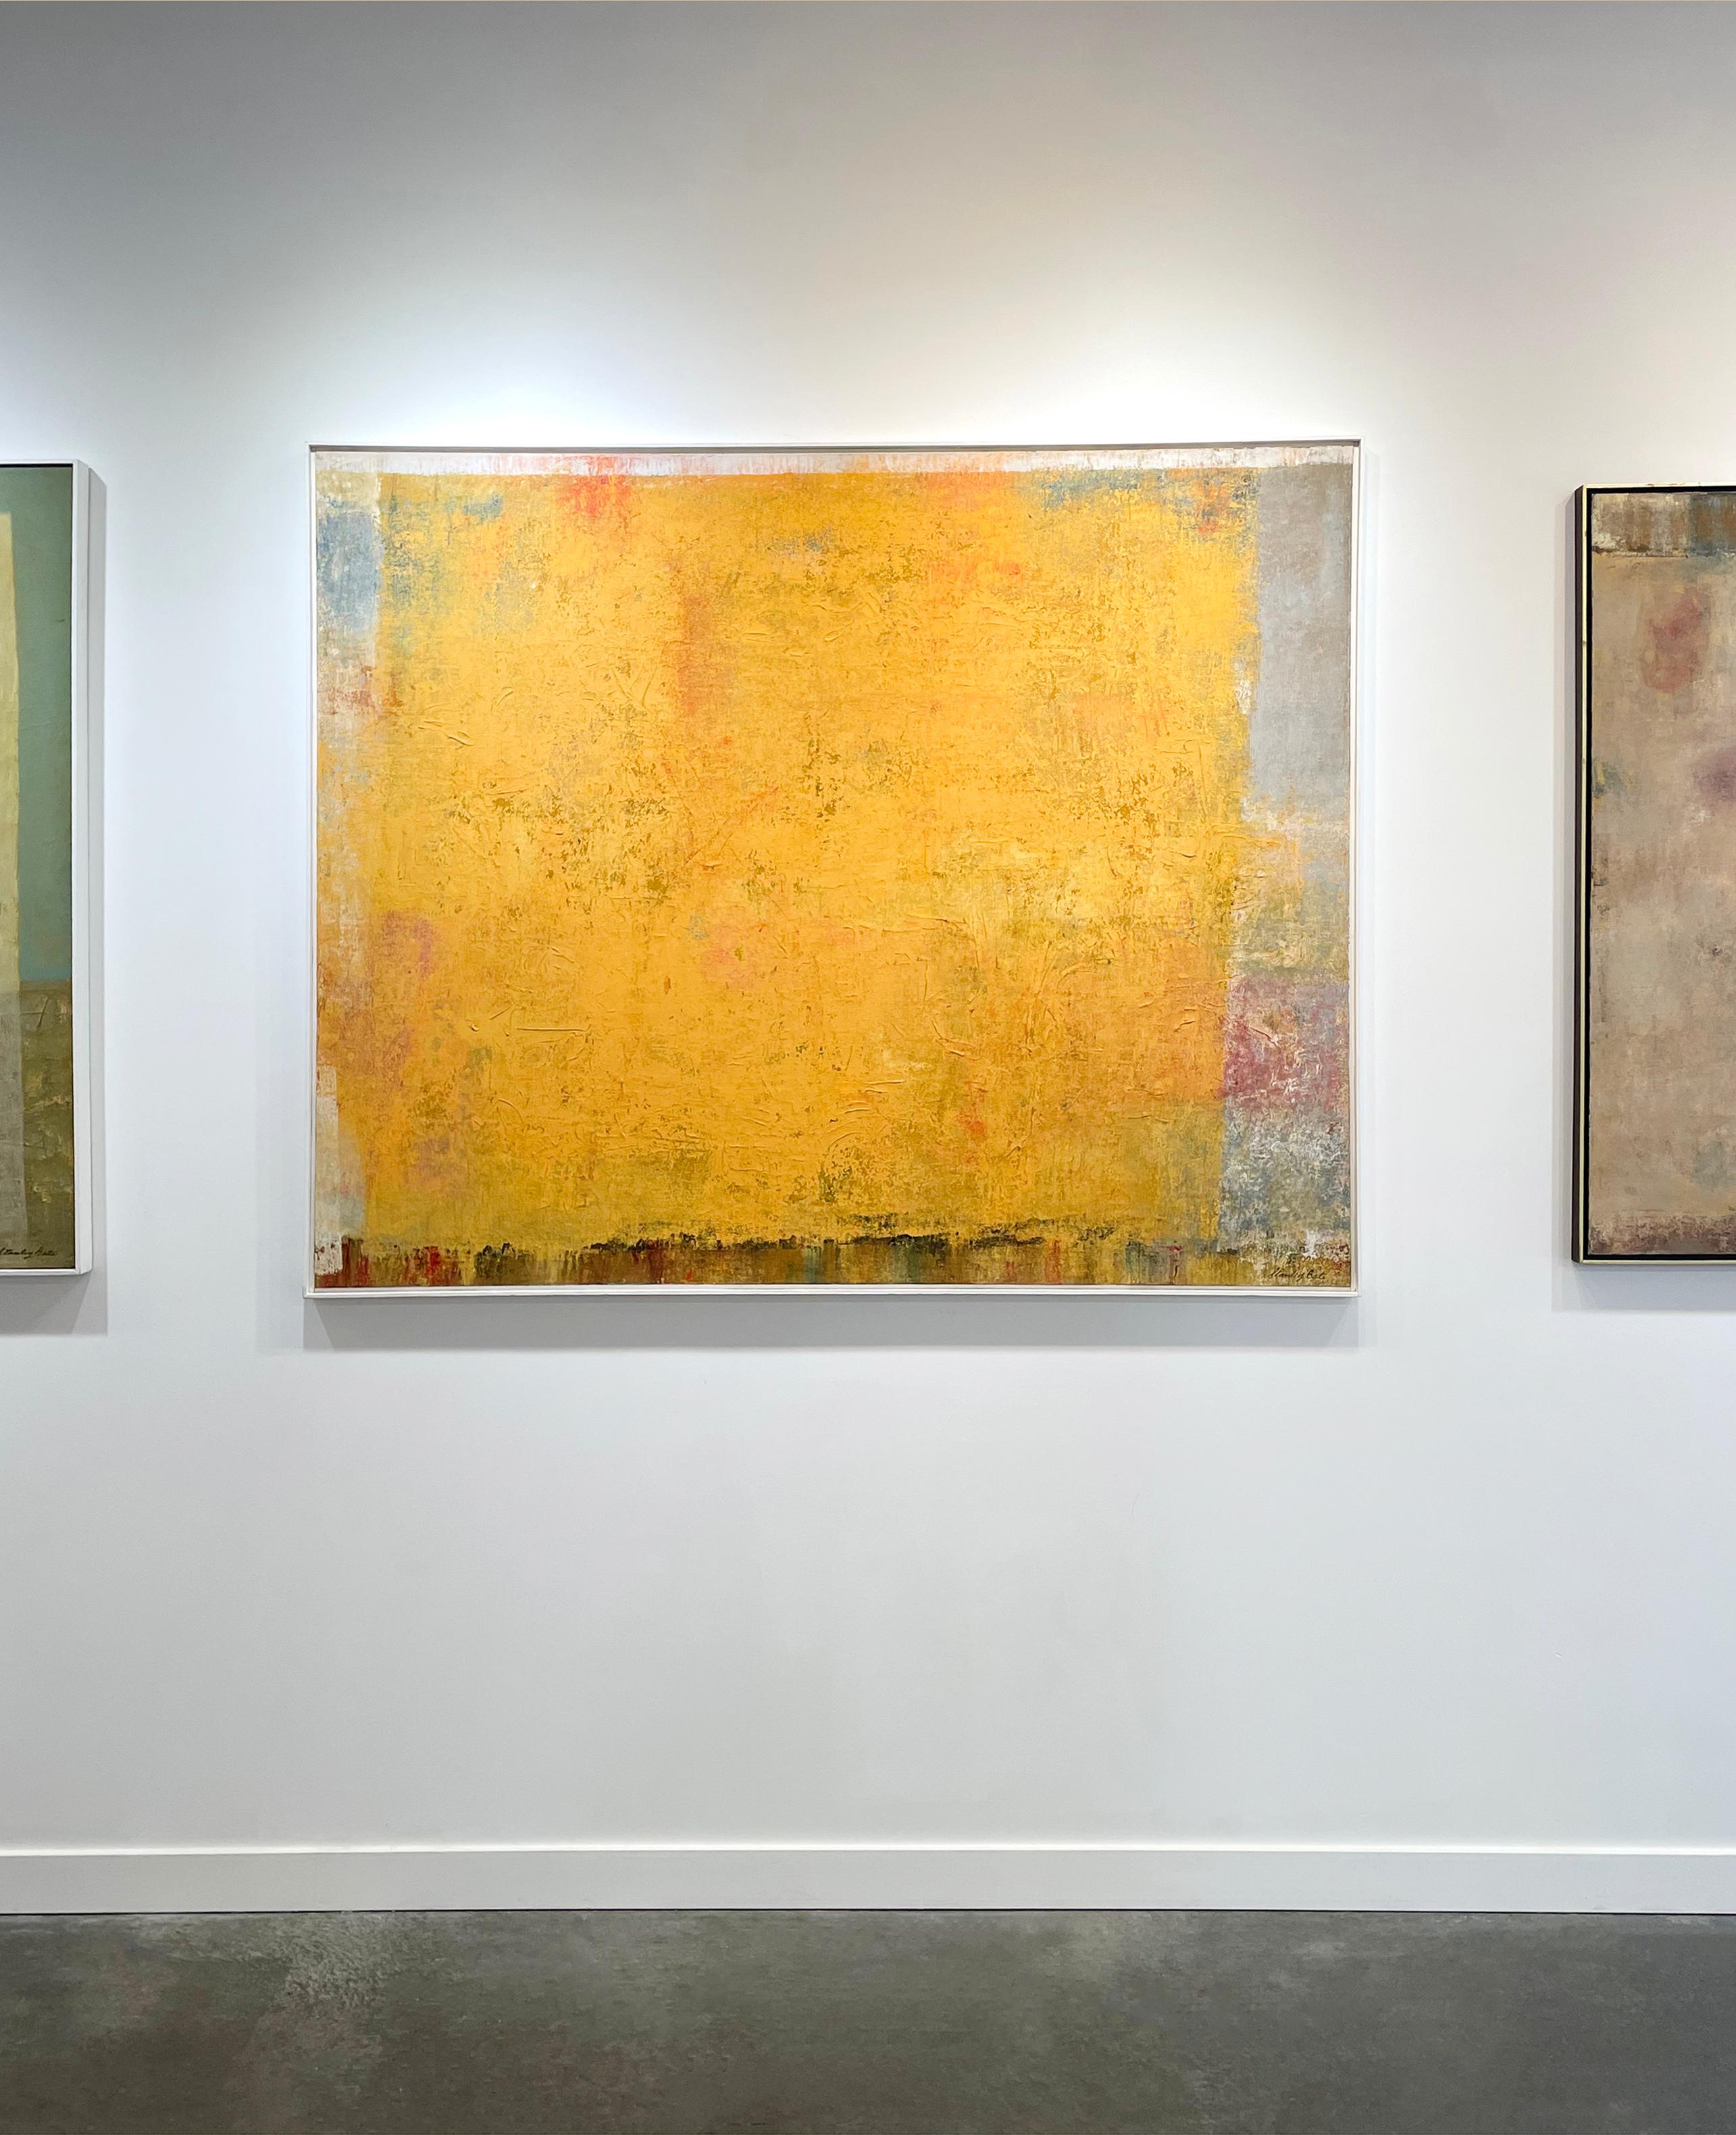 This original Modern abstract painting by Stanley Bate is made with oil paint on canvas. The artist has layered different muted colors like grey and maroon beneath a vibrant yellow layer of paint. The result is a bright, warm, highly textured piece.